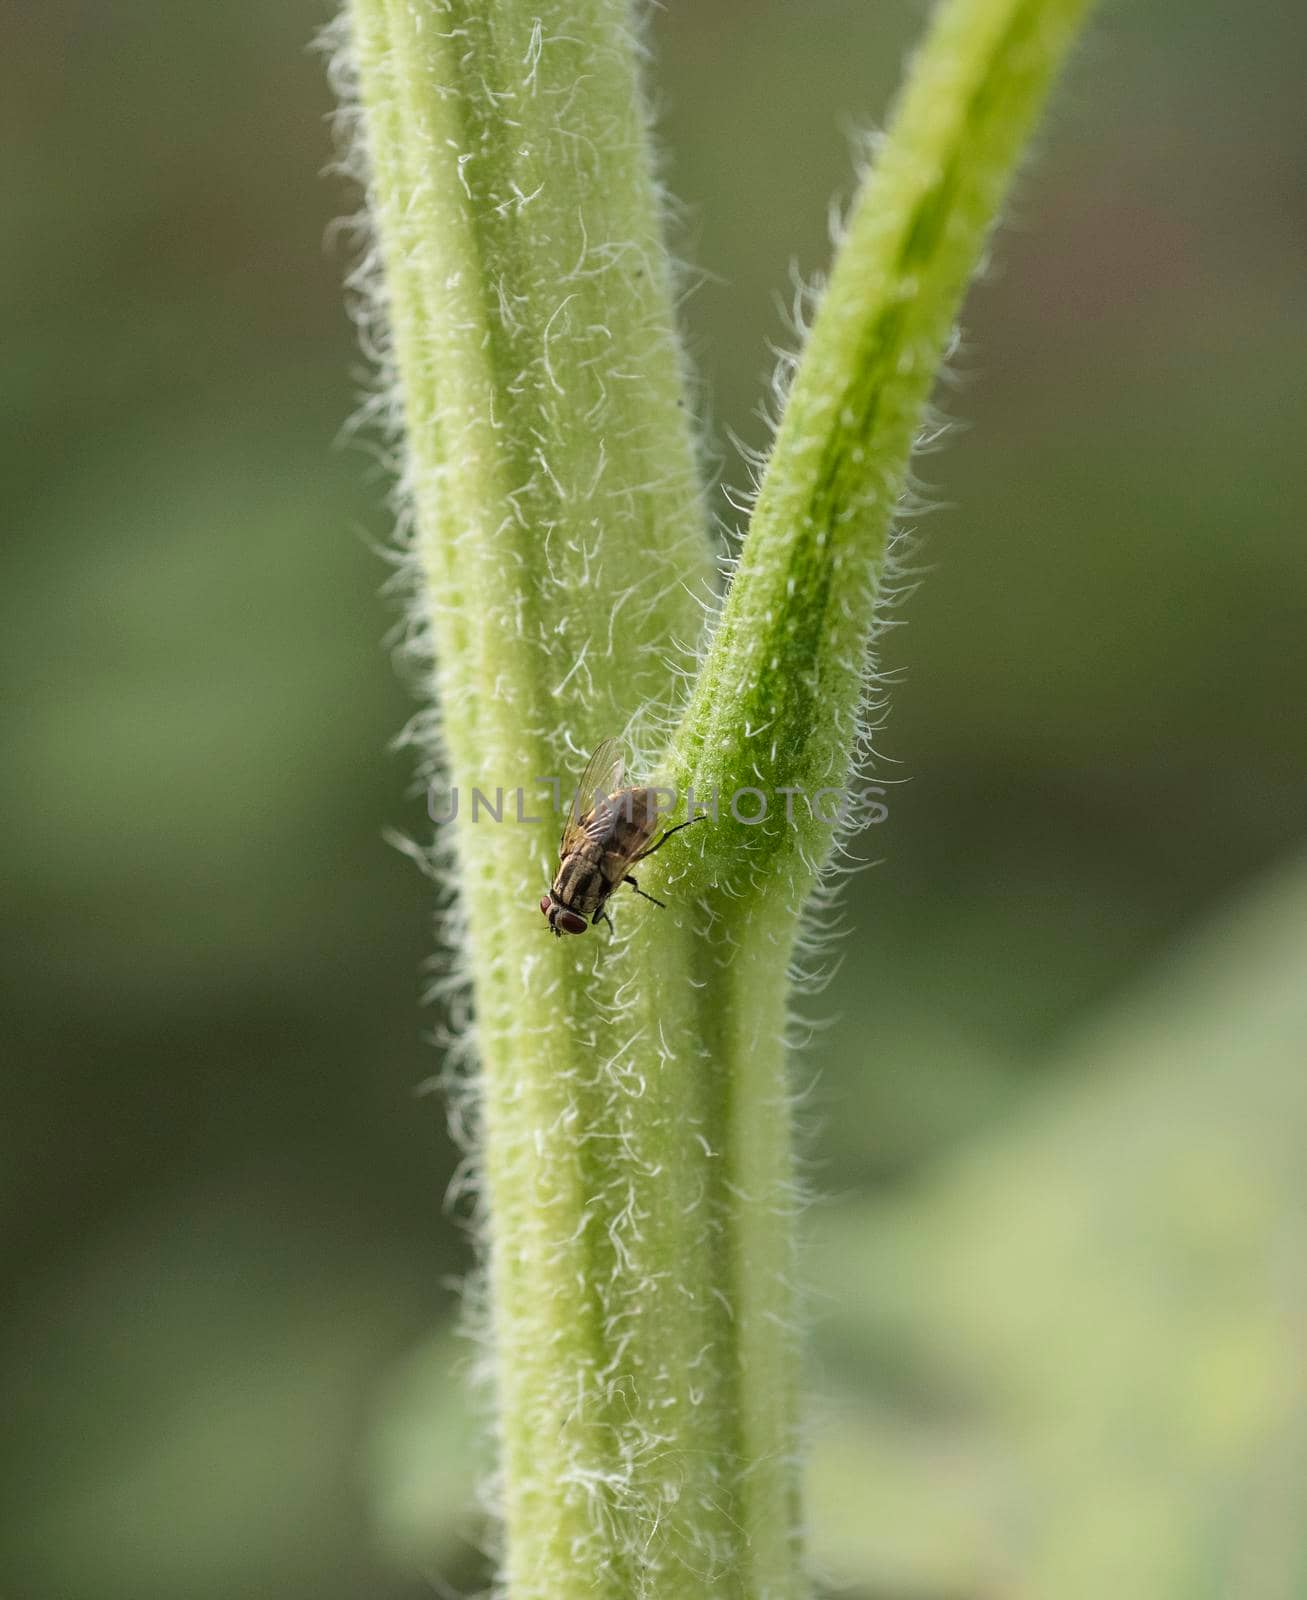 Close-up detail of a housefly insect musca domestica on a green plant stalk with trichome hairs 